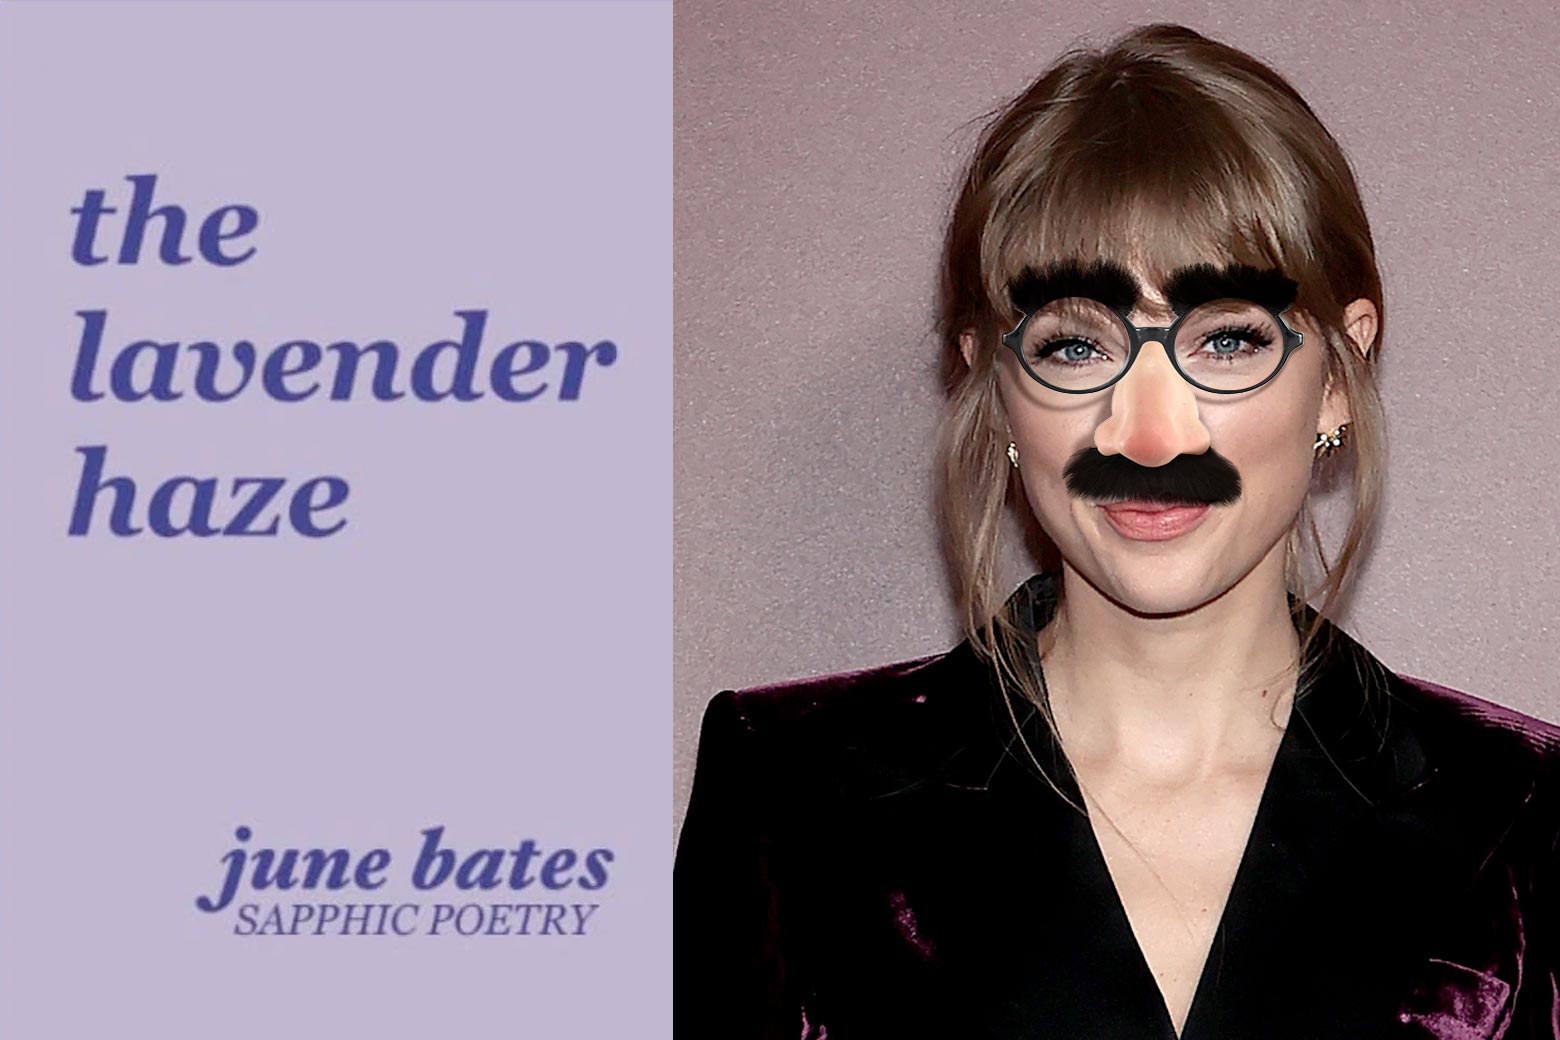 A plain cover of a book called "the lavender haze," and a picture of Taylor Swift wearing a clever disguise.